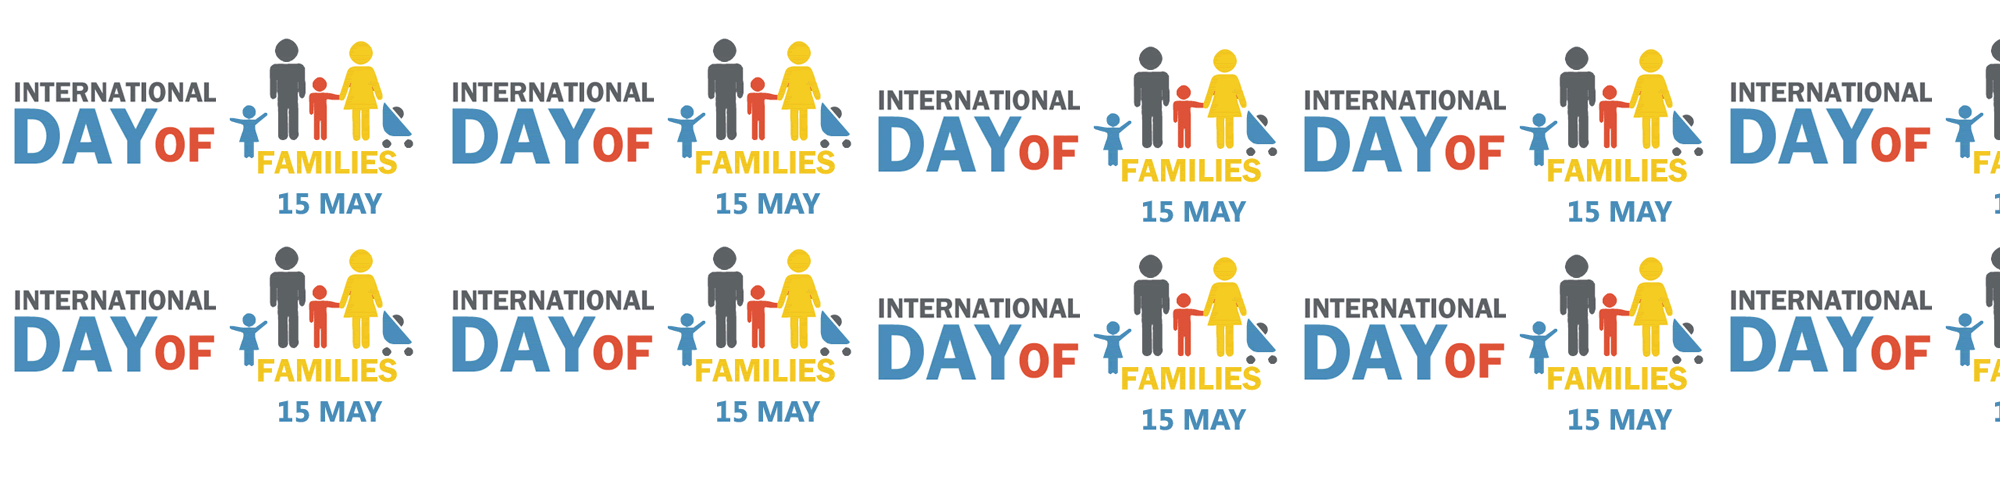 International Day Of Families 15 May Header Image